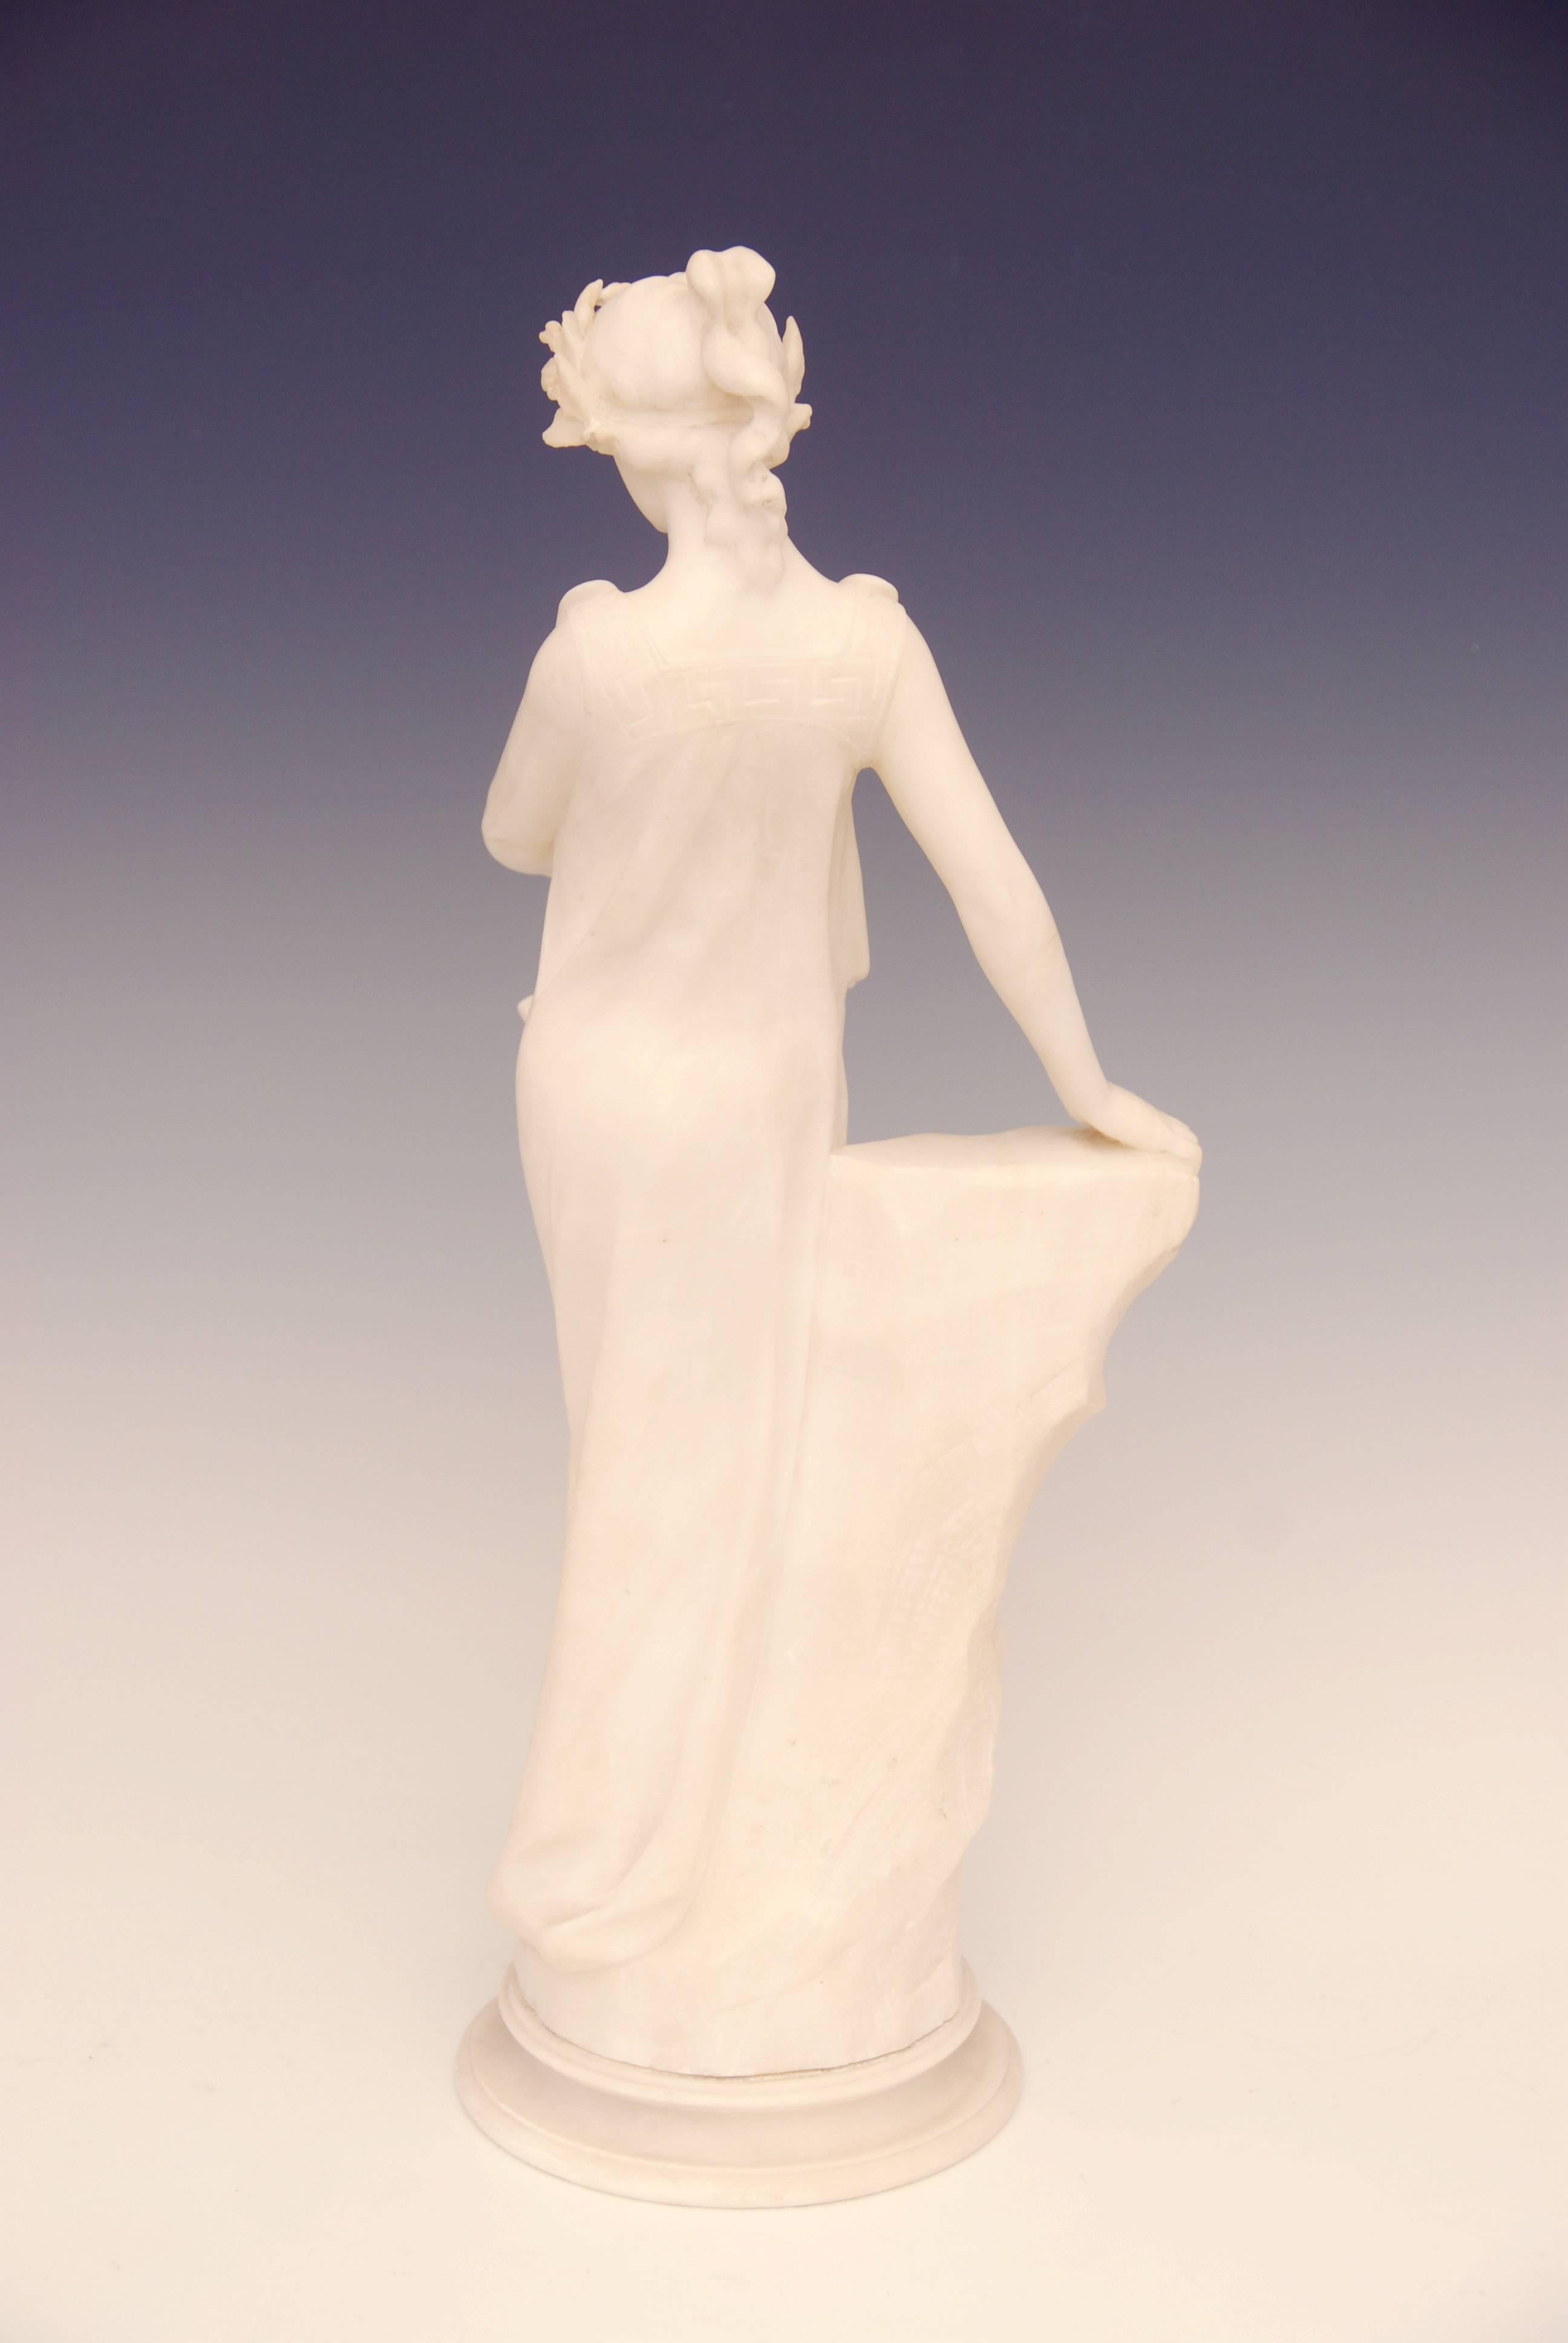 Italian Carved Alabaster Art Nouveau Statue of a Muse Holding a Lyre by Luchini 1